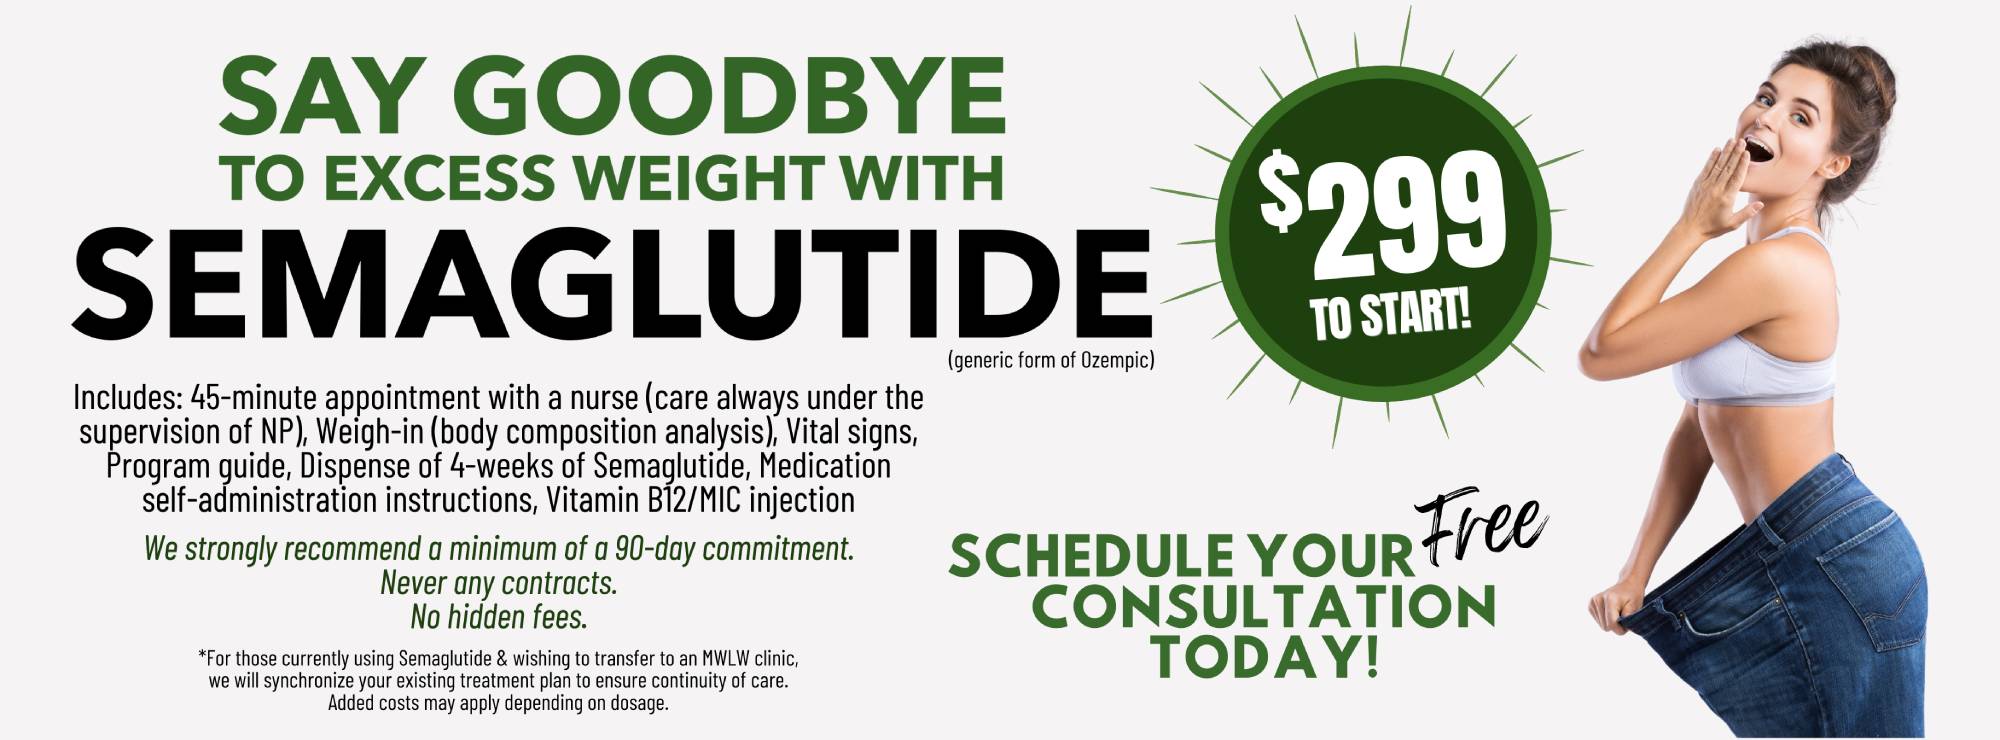 Semaglutide Start Today $299. Schedule your free consultation today.